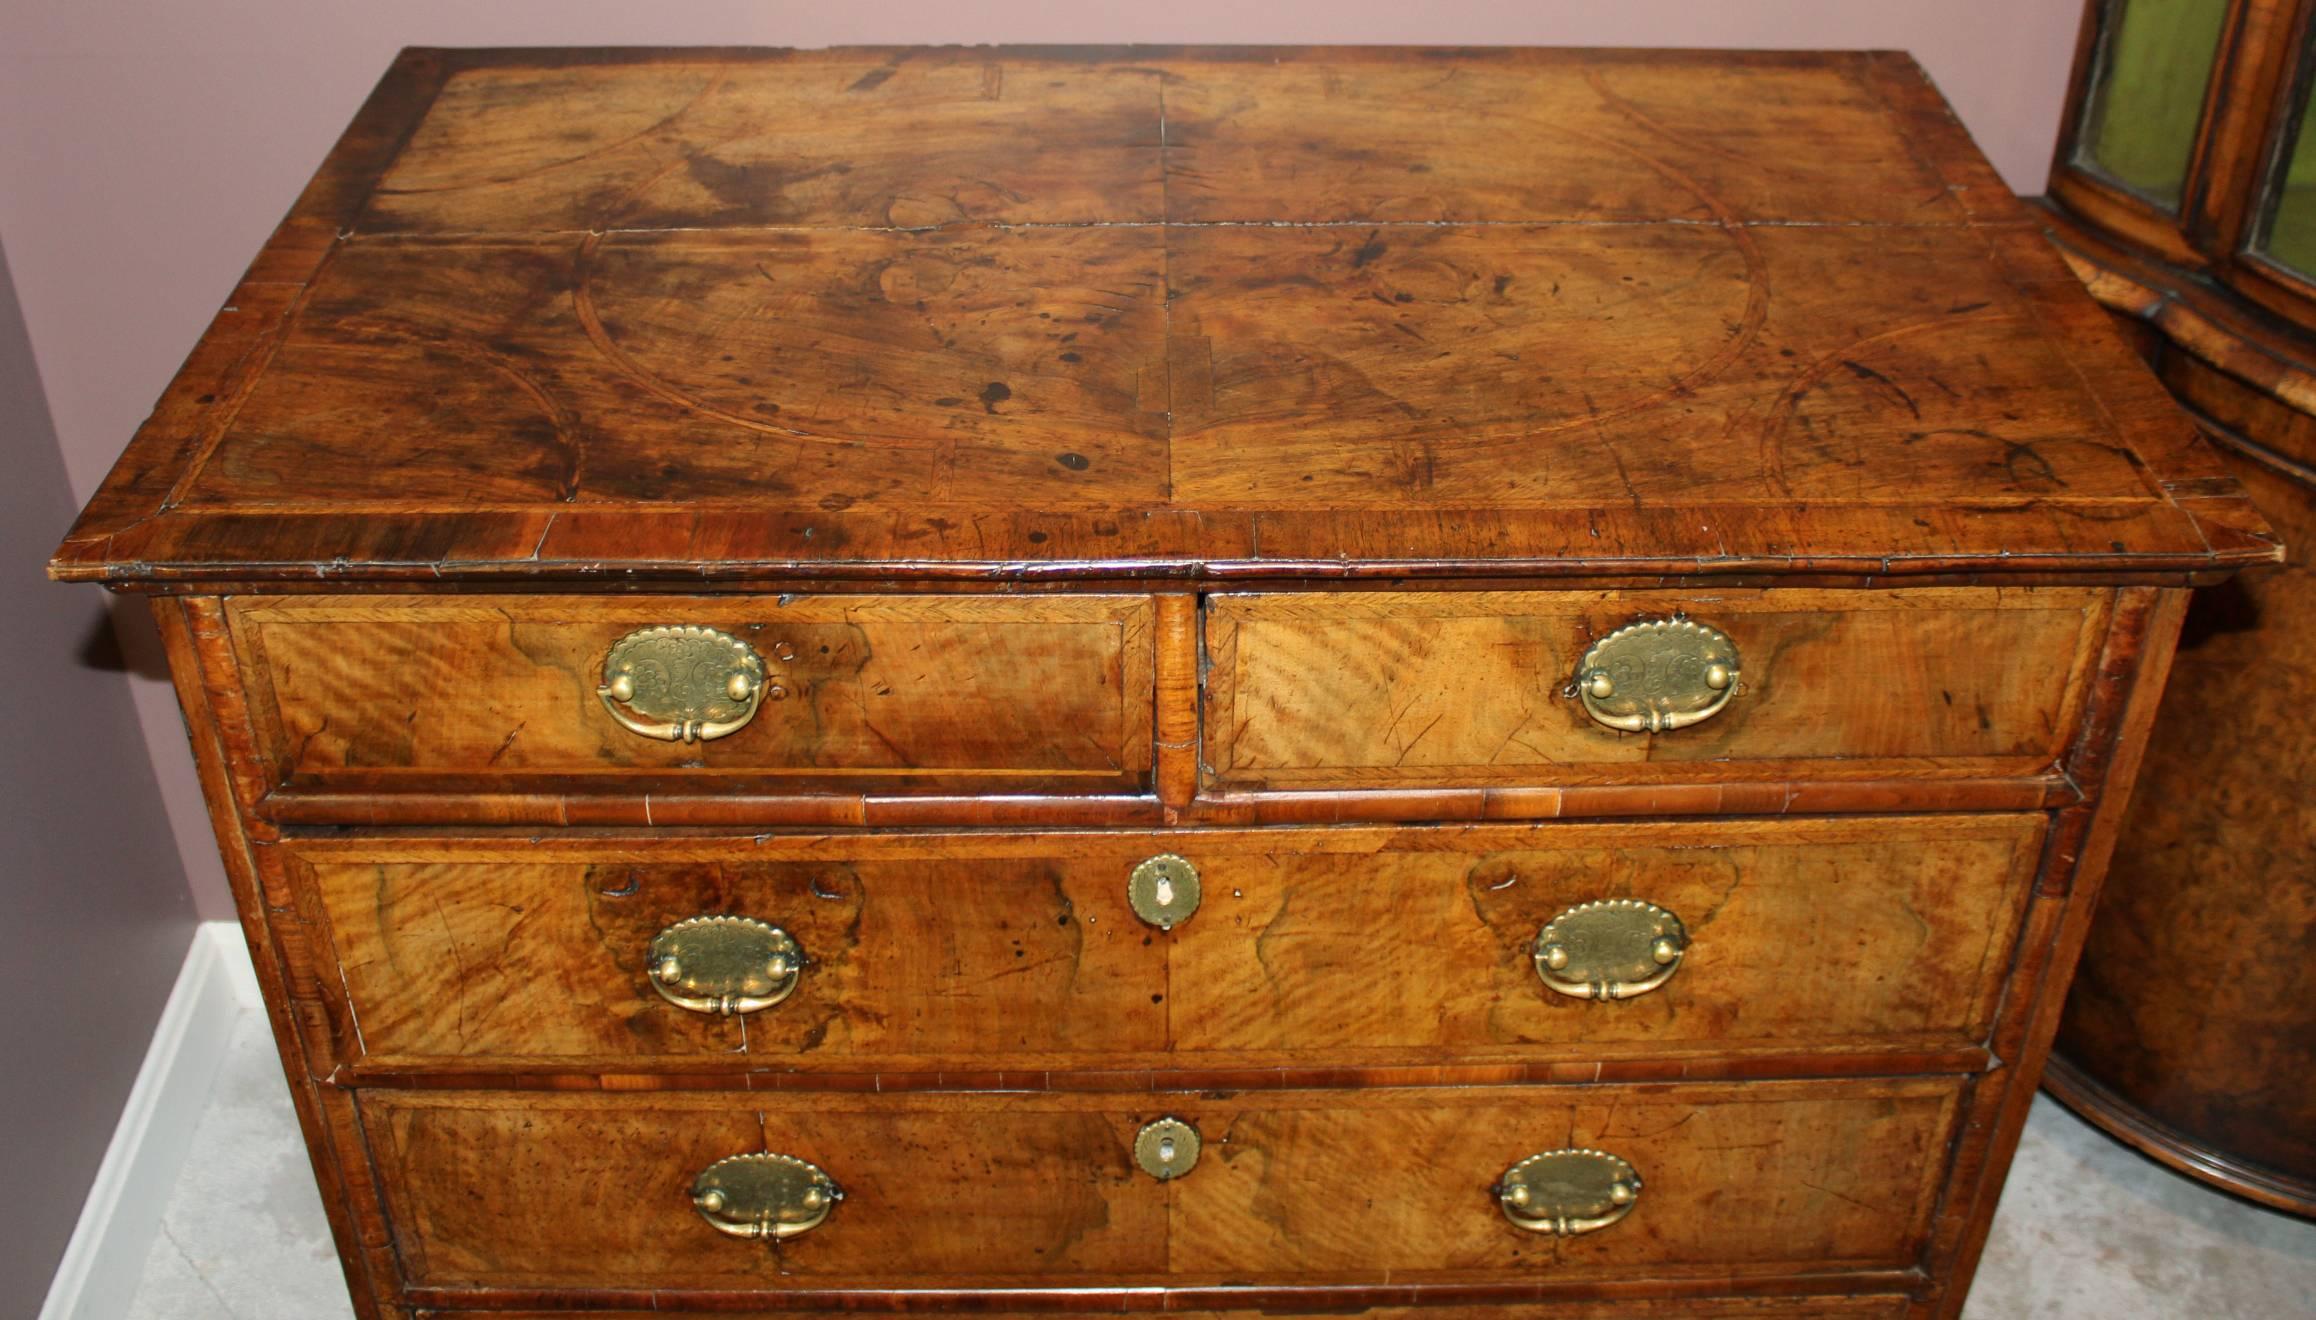 A fine example of a William & Mary four drawer chest in walnut, with quarter veneered top with feather banded drawers all raised on restored bun feet. The brass pulls are18th century but not original, and the escutcheons appear original. From a